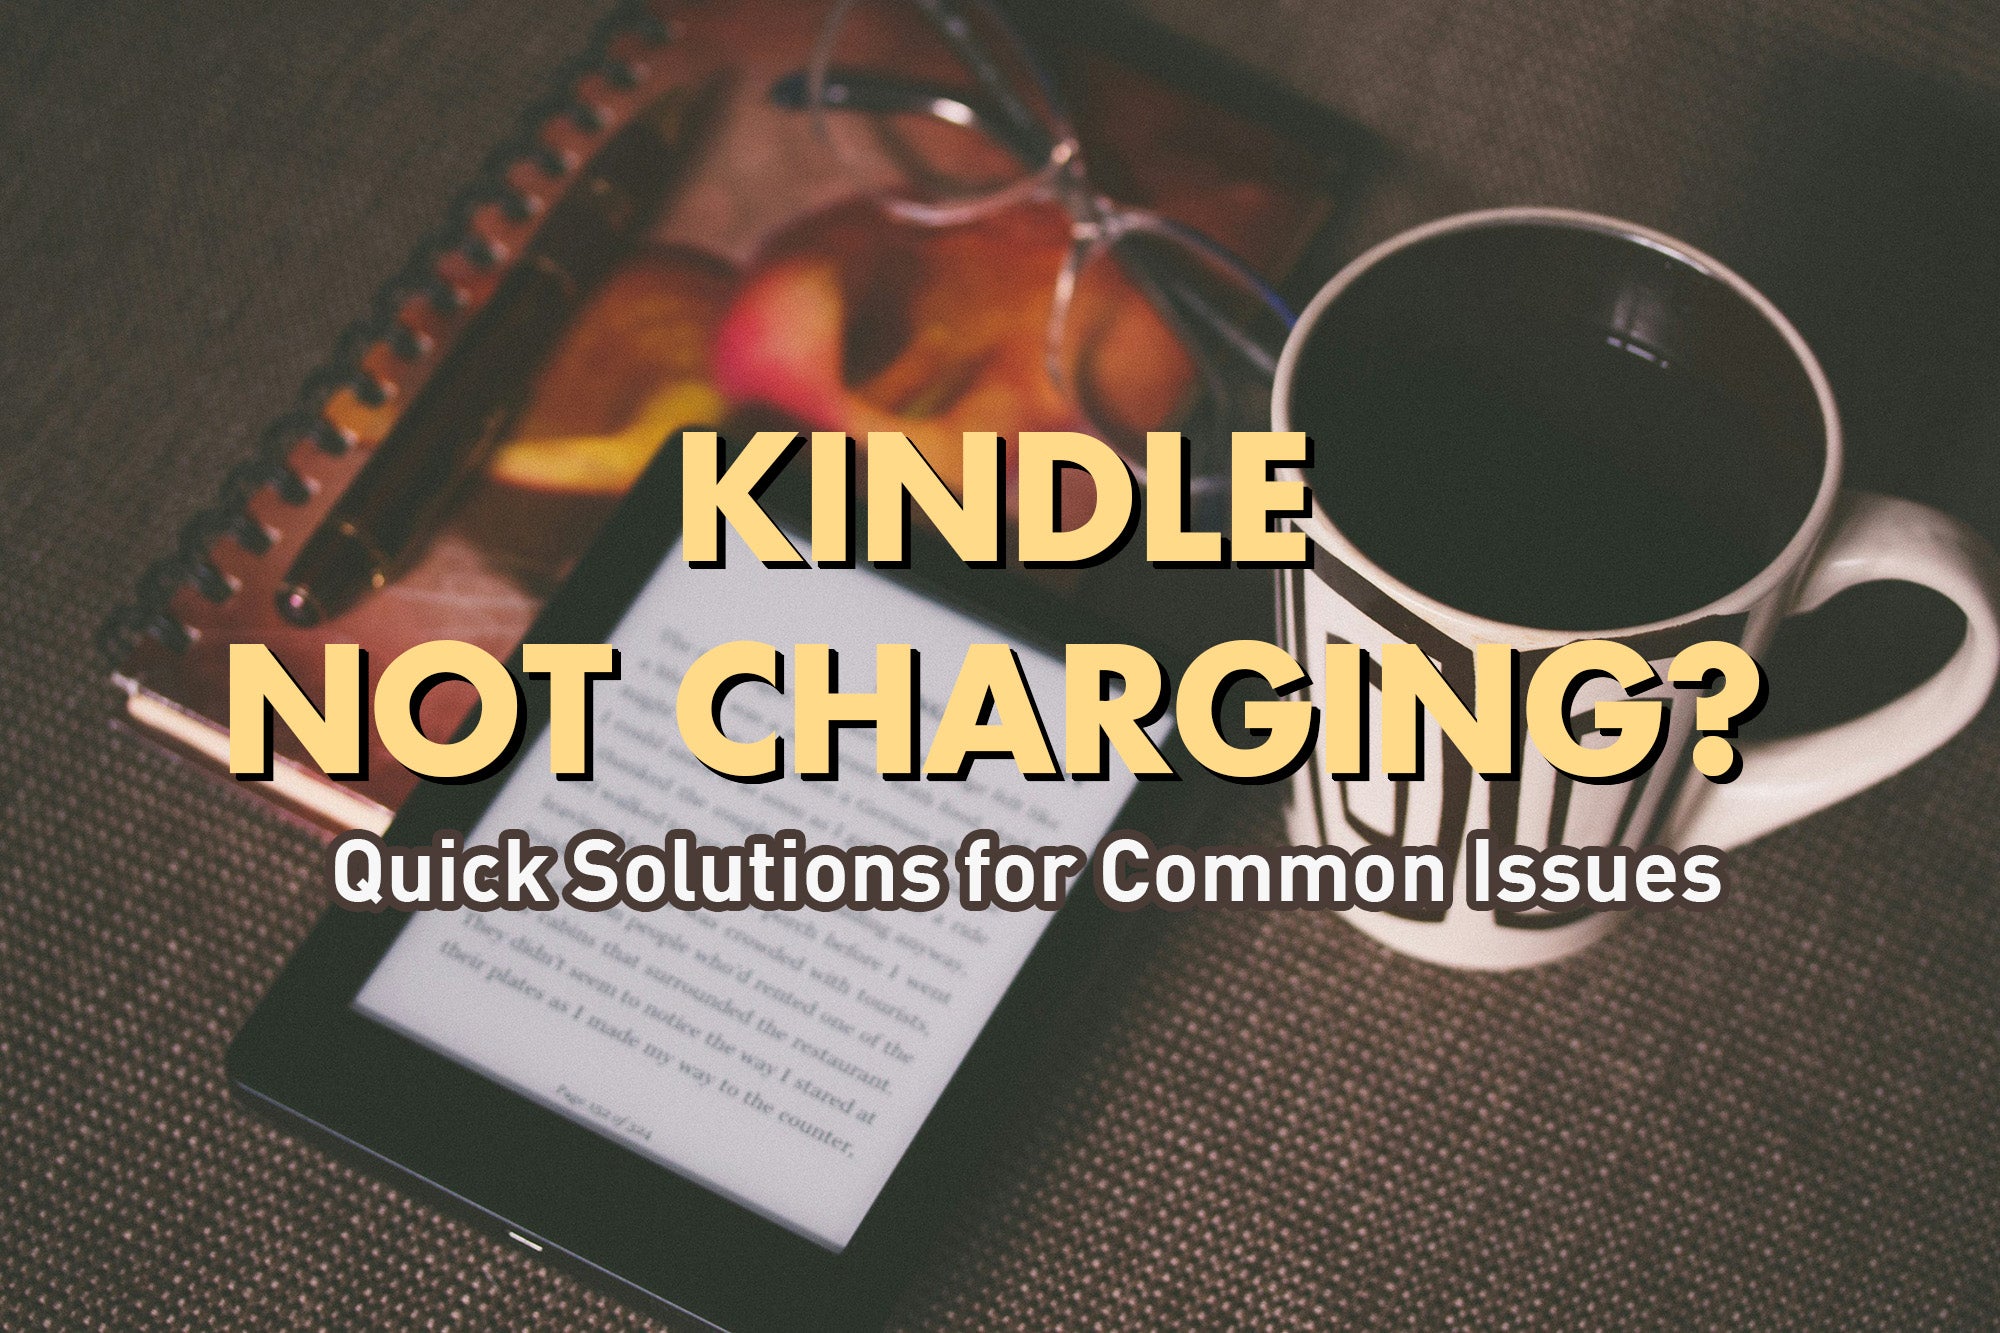 Kindle not Charging?